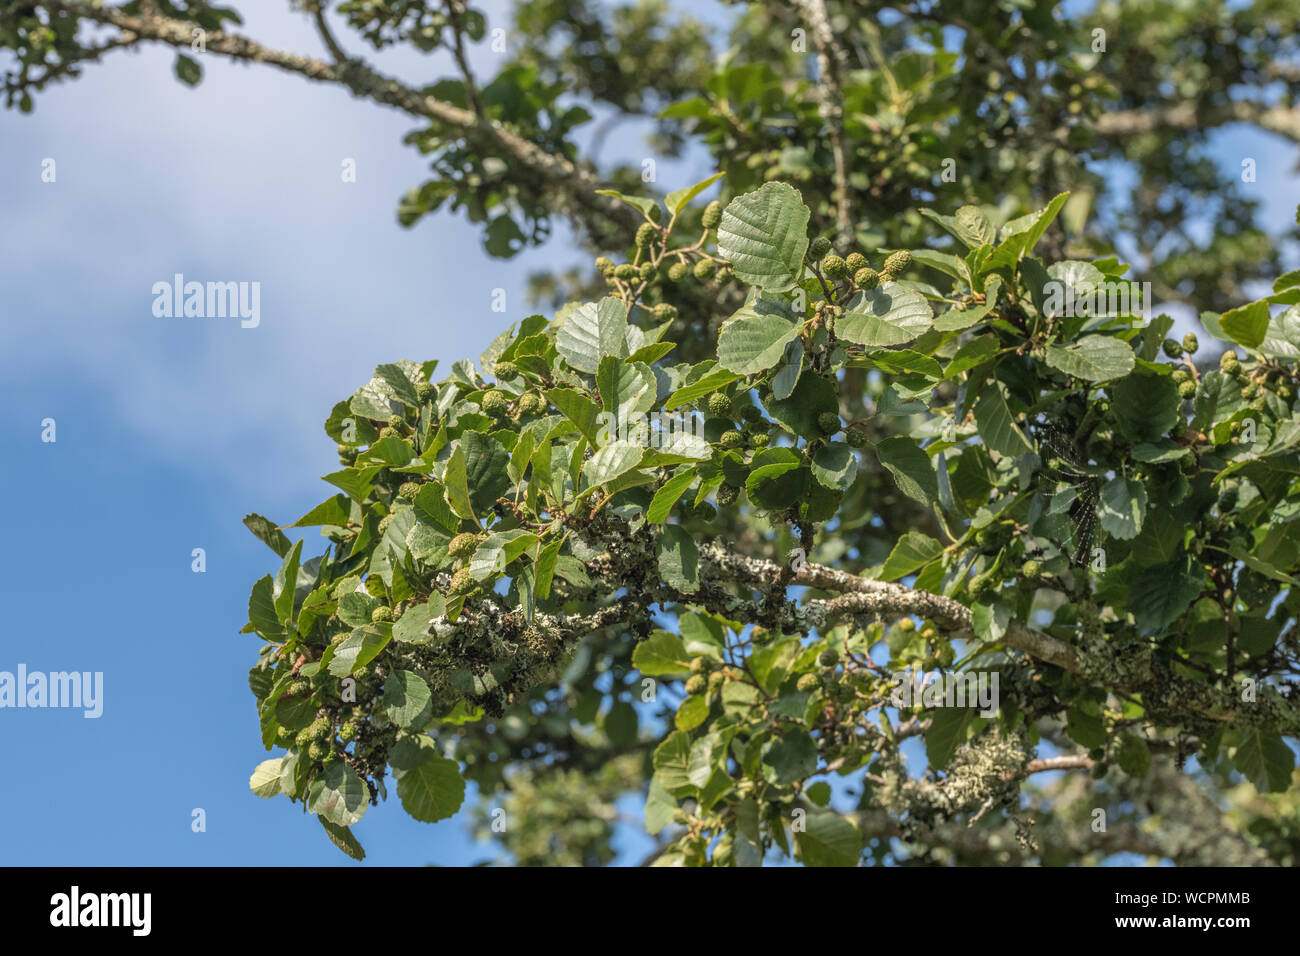 Green cones / fruits and leaves of the Common Alder / Alnus glutinosa. Once used as a medicinal plant in herbal remedies. Stock Photo